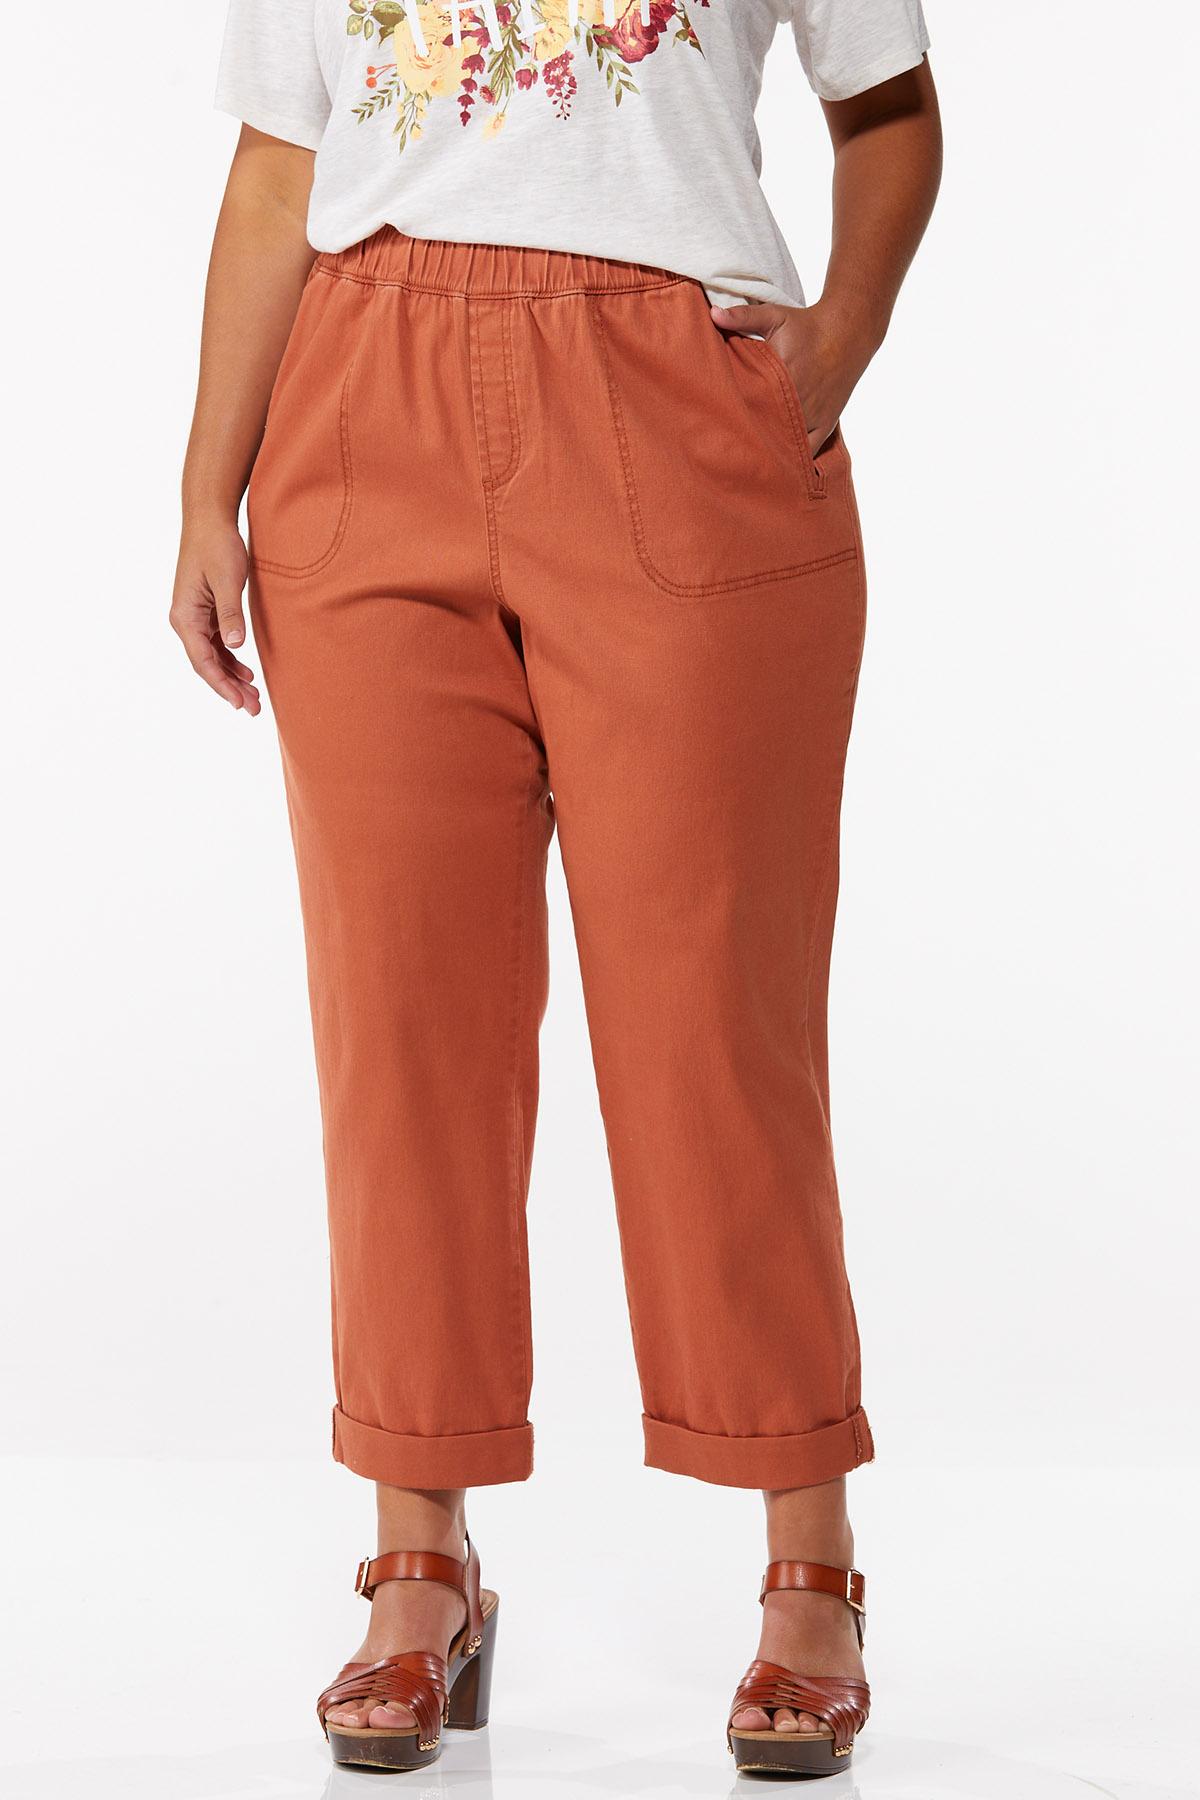 Plus Size Solid Pull-On Twill Pants